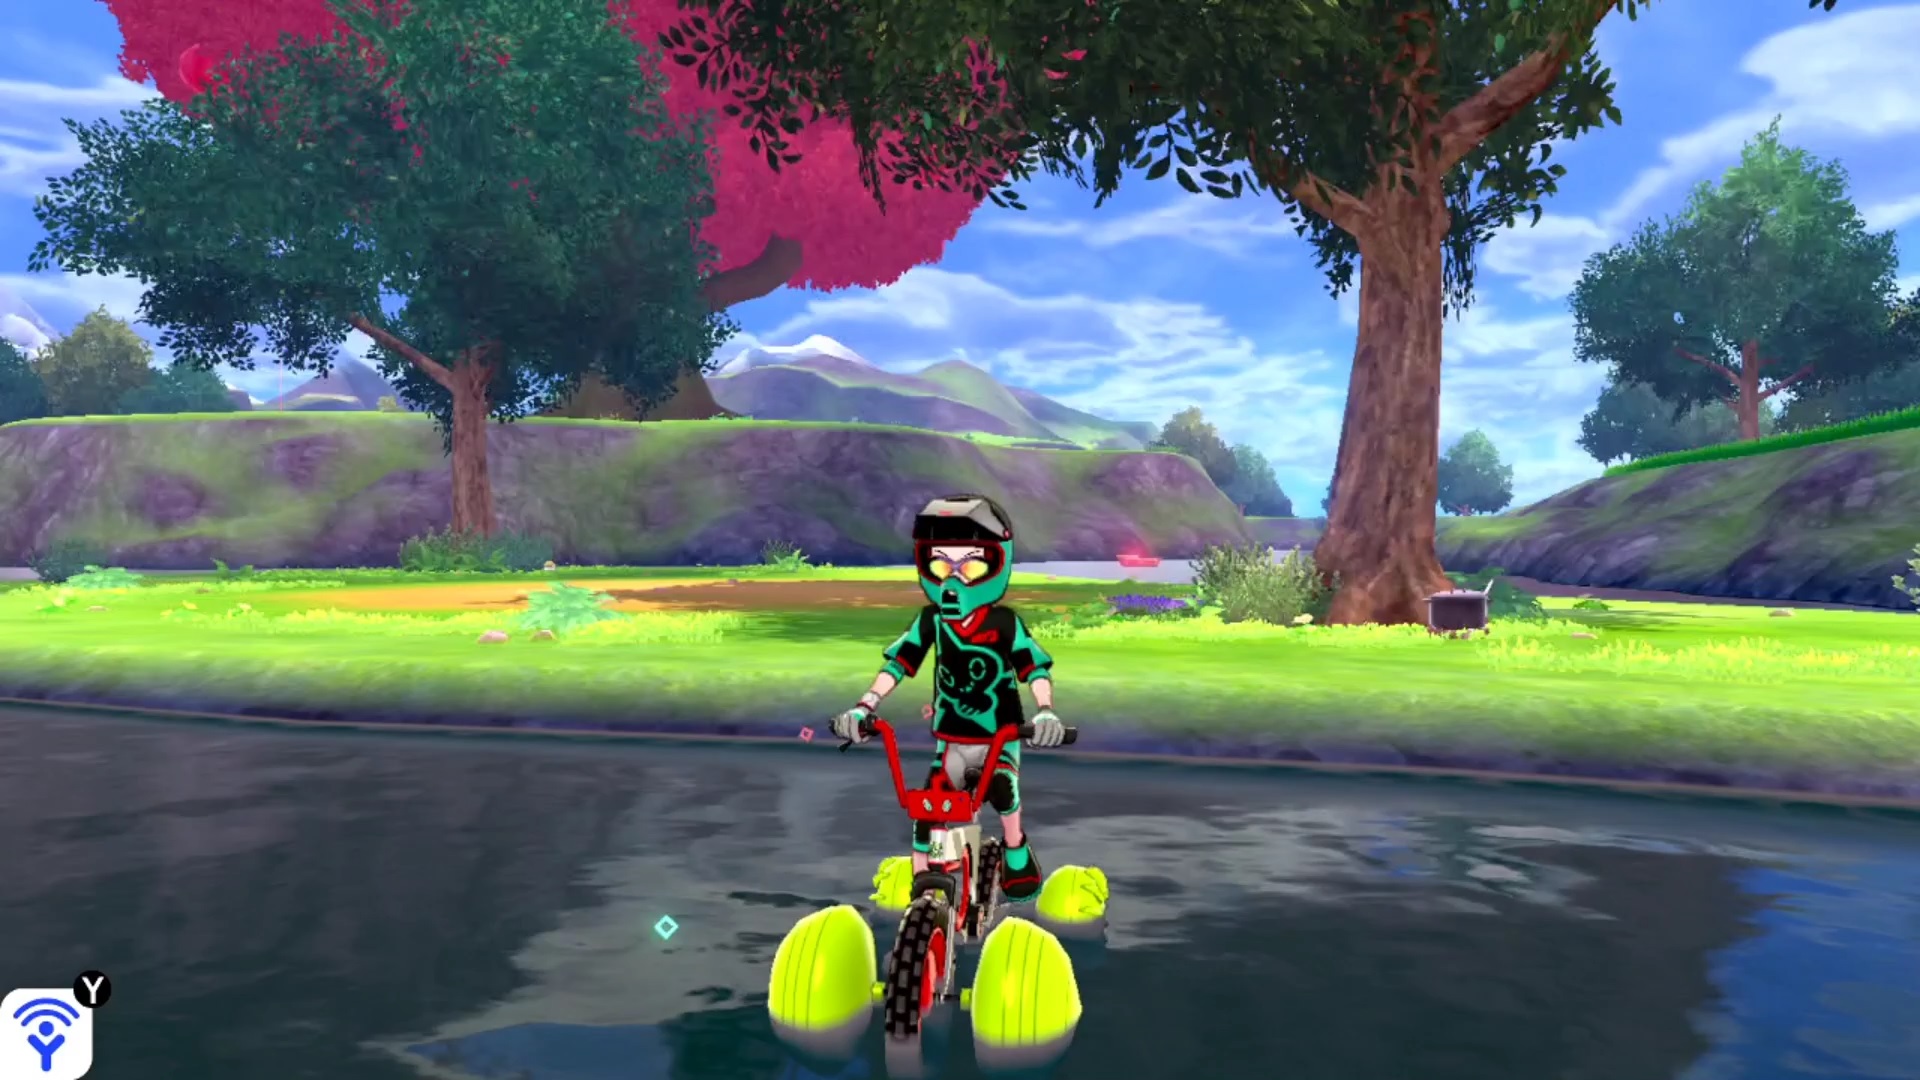 Pokémon Sword and Shield Keldeo: The Trainer riding a floating bike in water, with various trees and hills behind them.